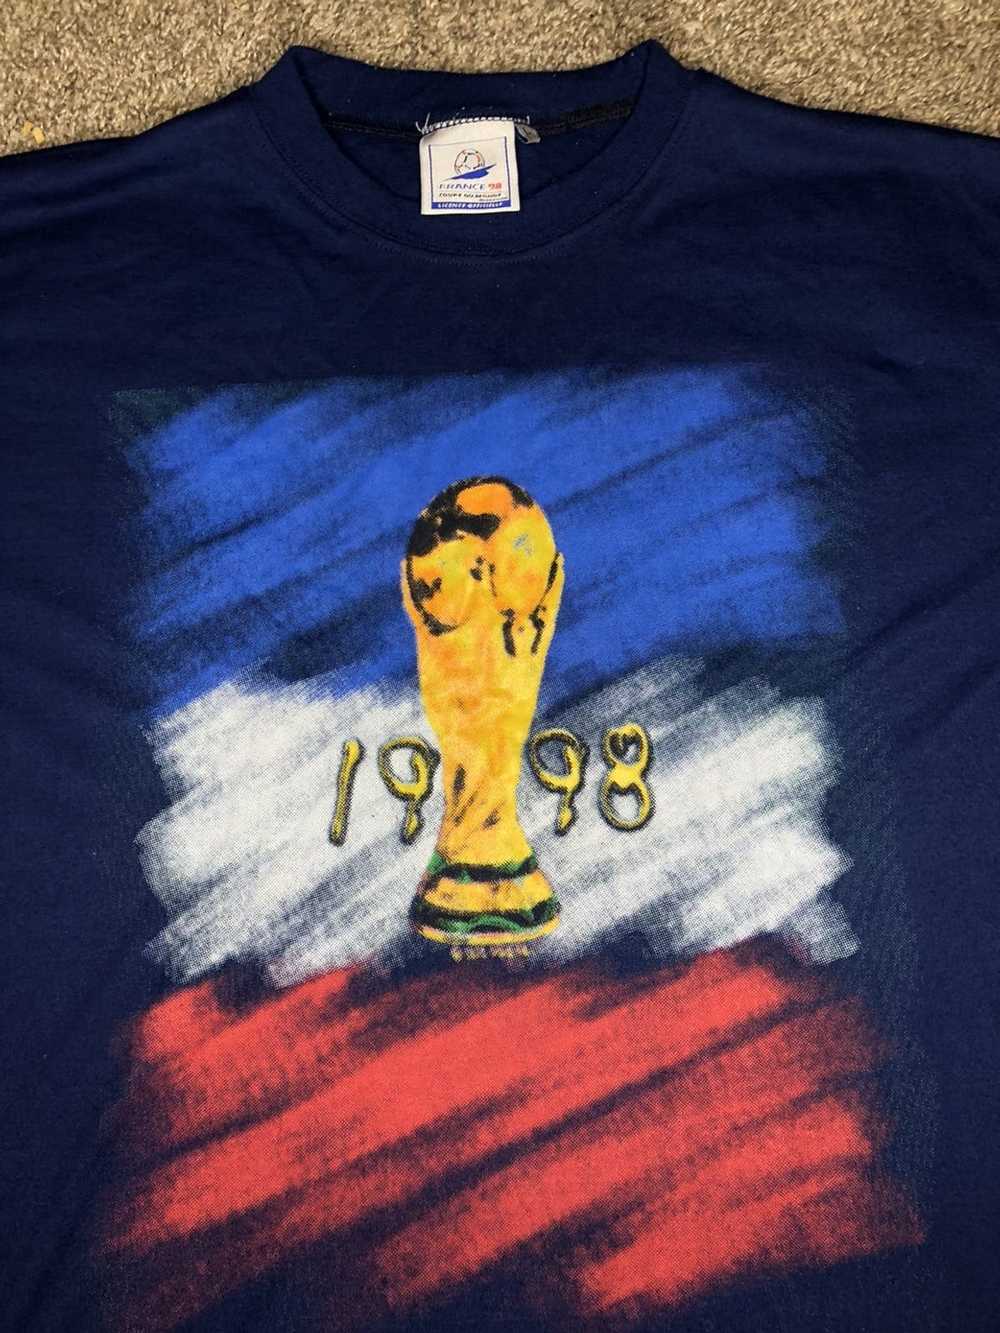 Fifa World Cup × Vintage 1998 World Cup France Tee - image 2